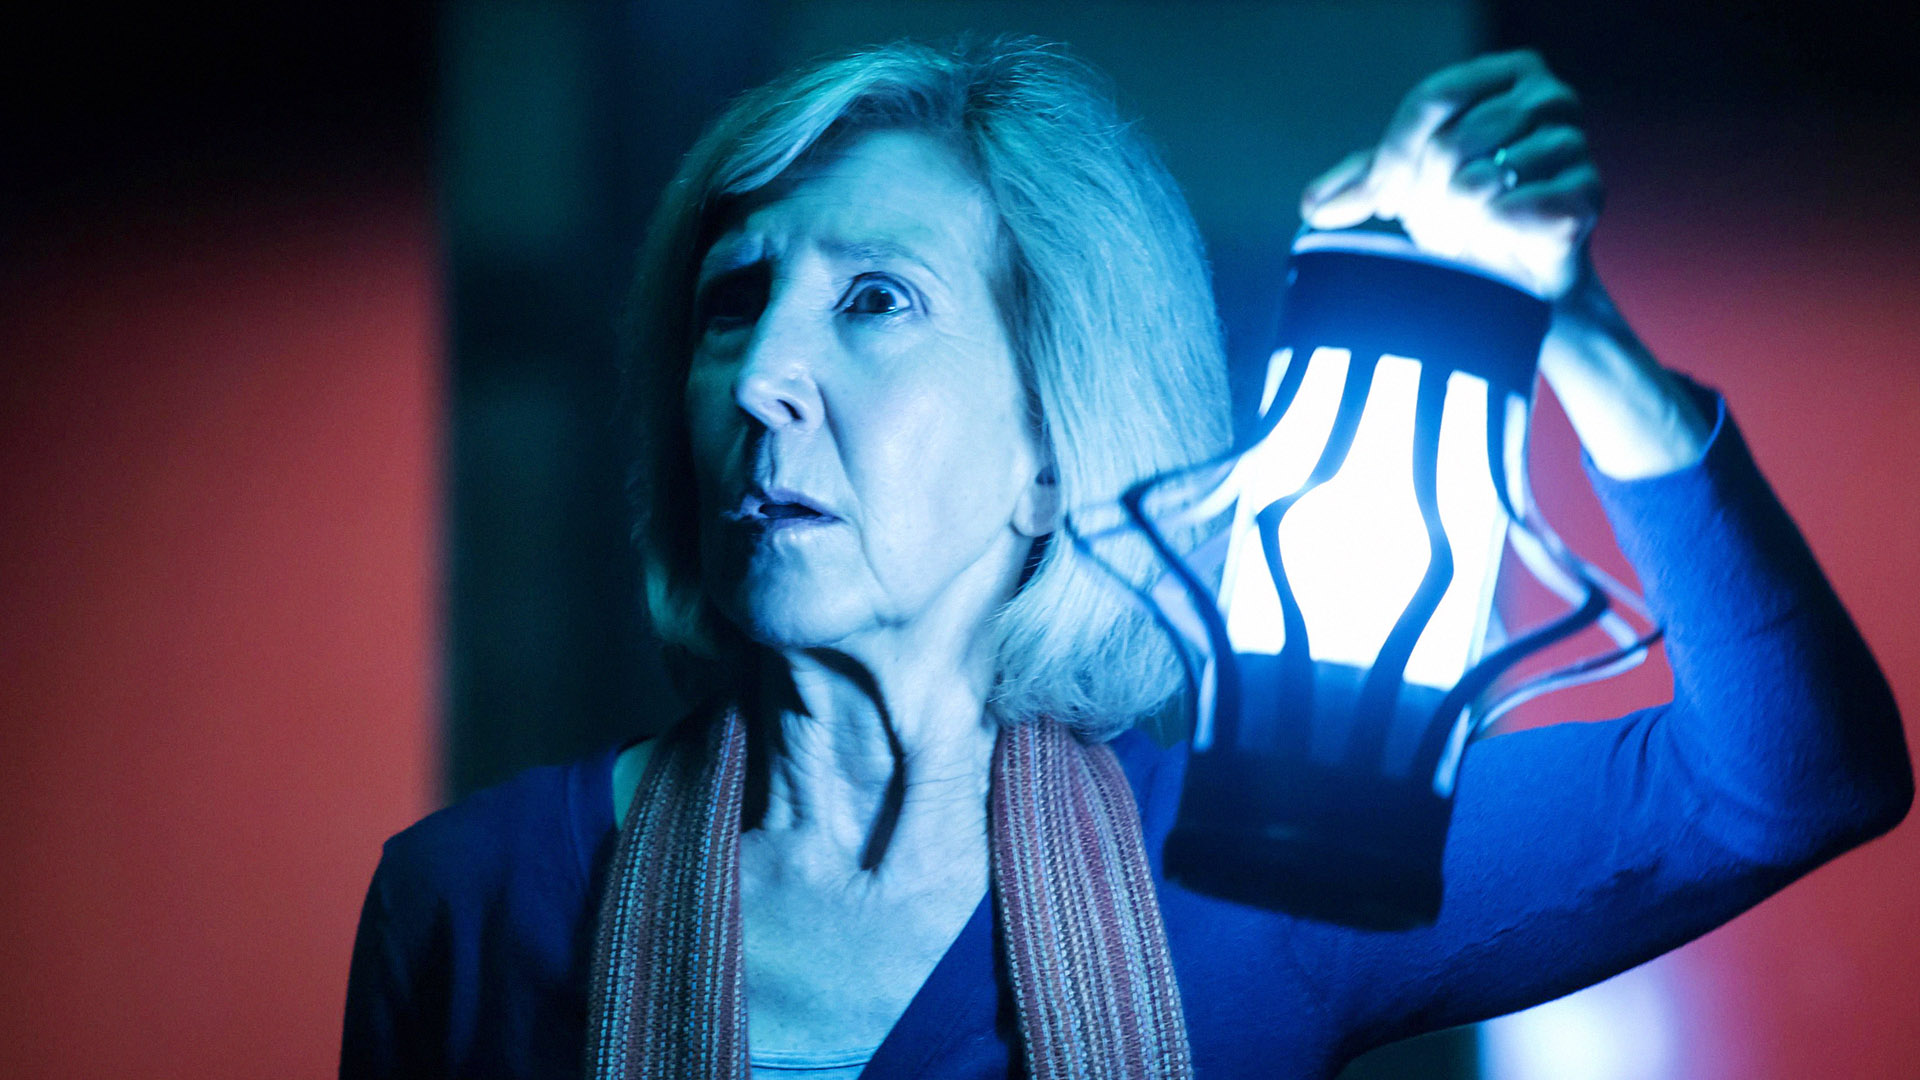 How to Watch Insidious Movies in Chronological Order For Story to Make Sense